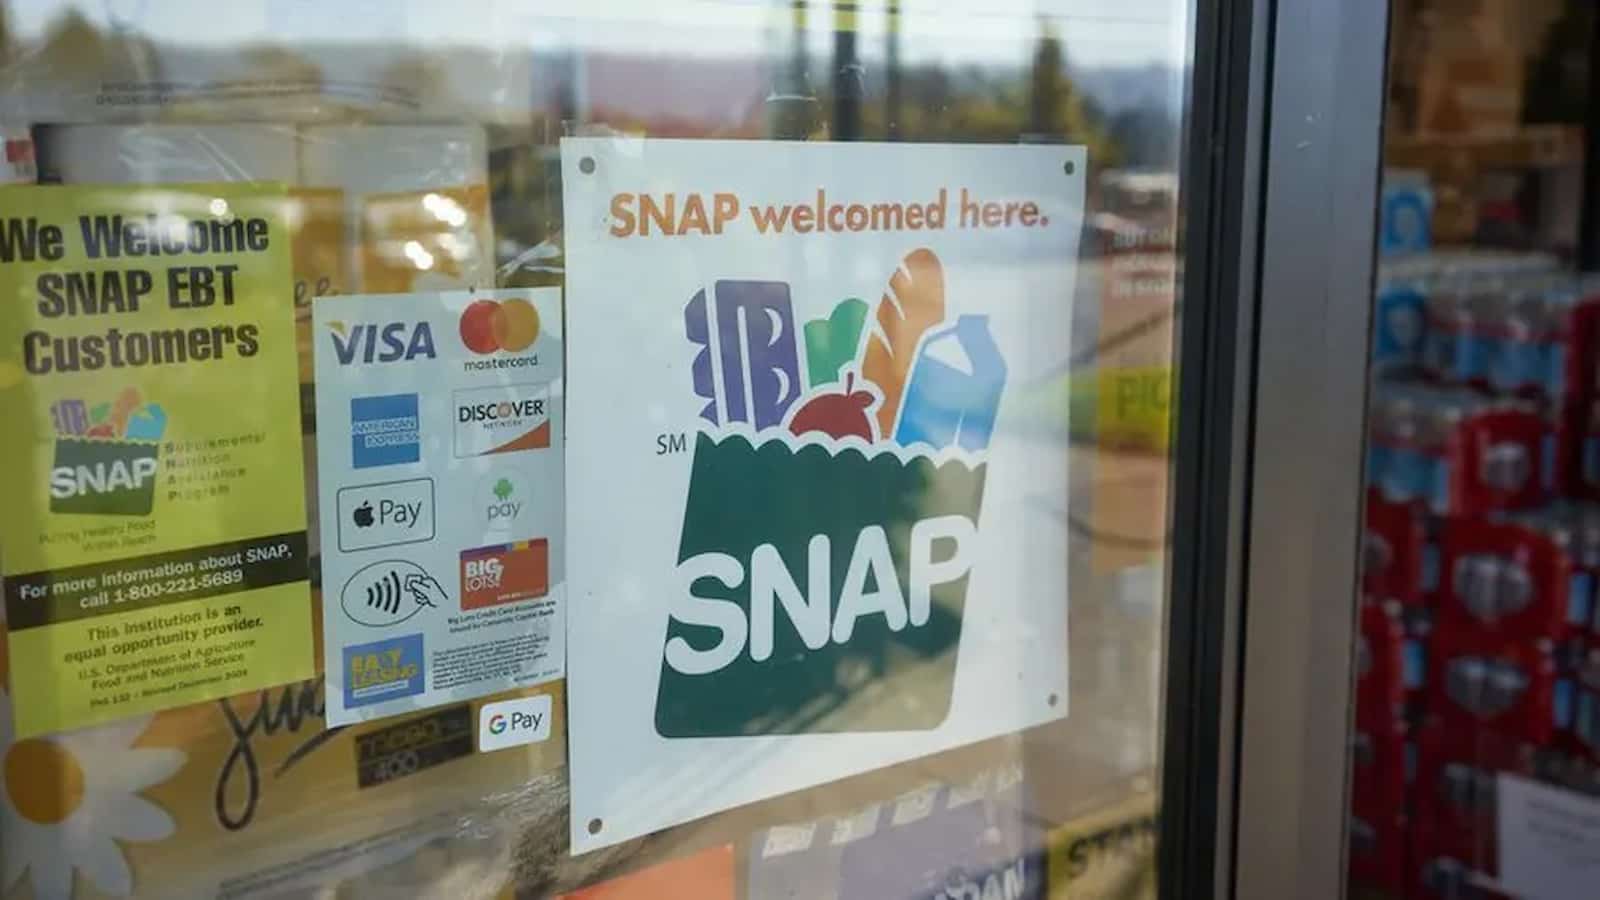 SNAP Benefits Ending? What We Know About the Possible End